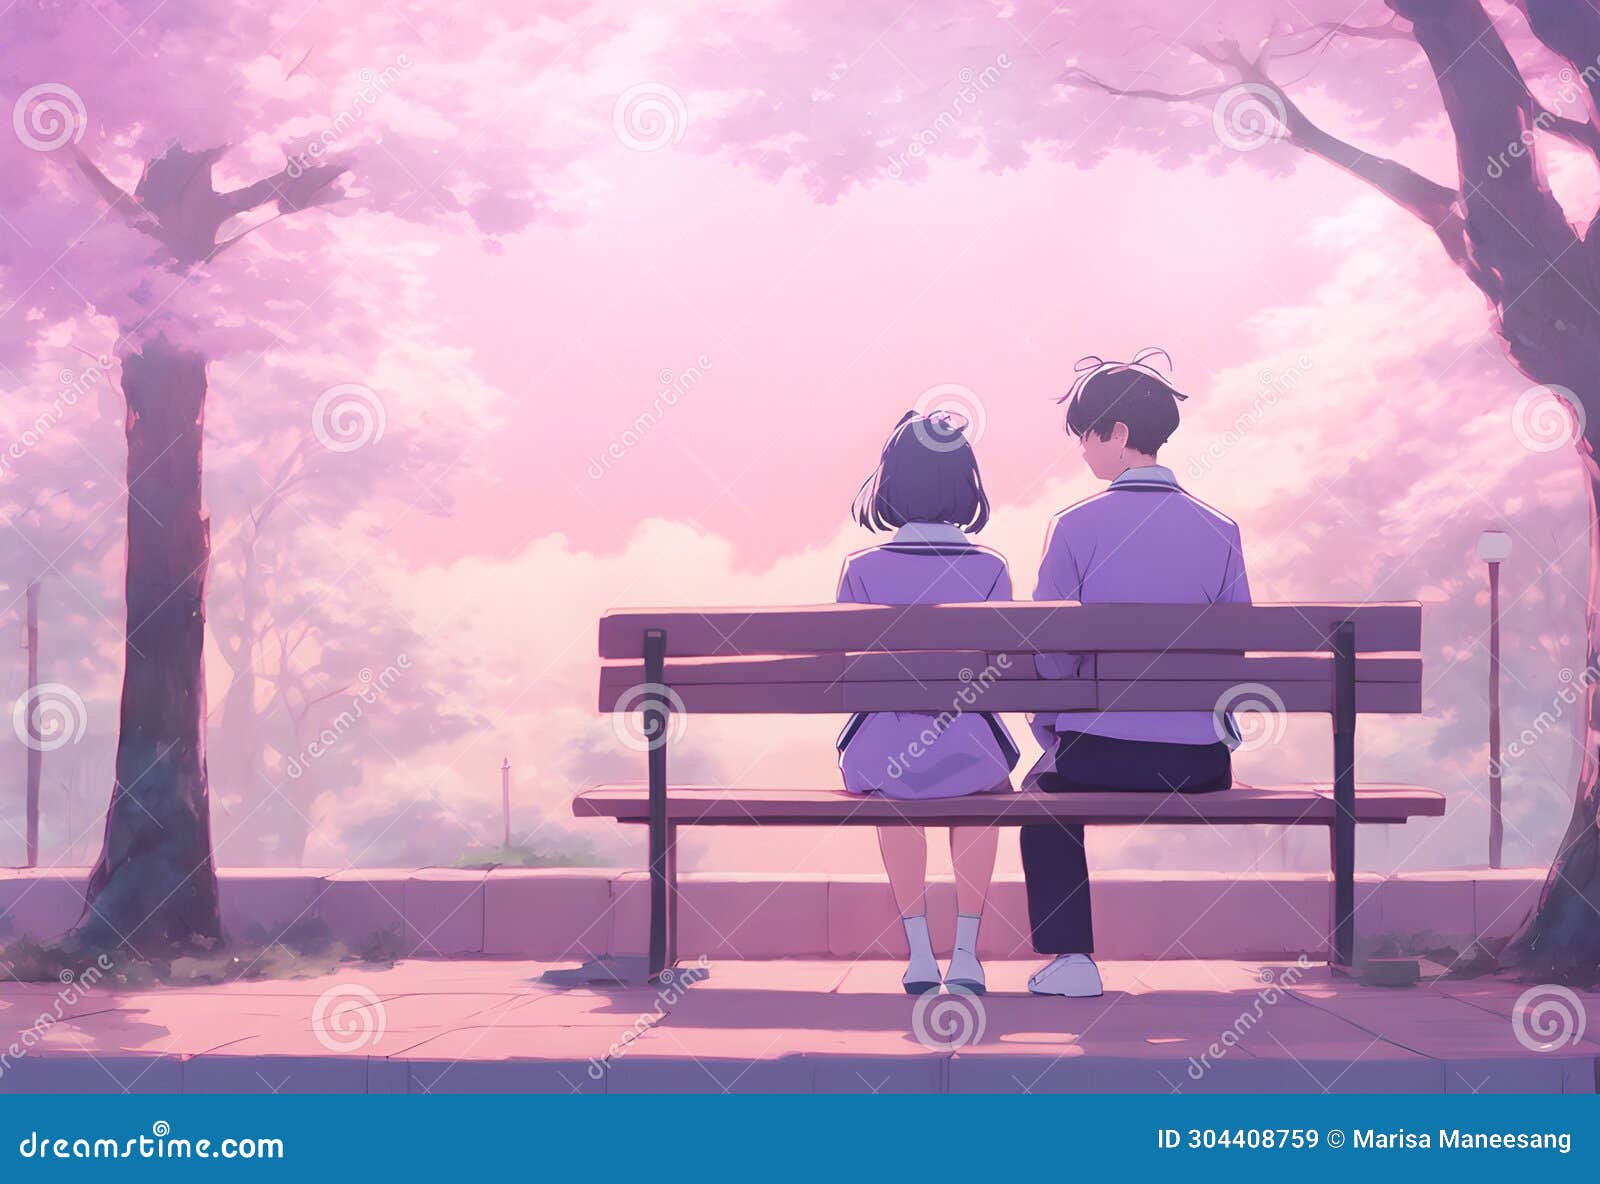 Create an anime girl sitting on a bench in a peaceful and serene  environment. She is